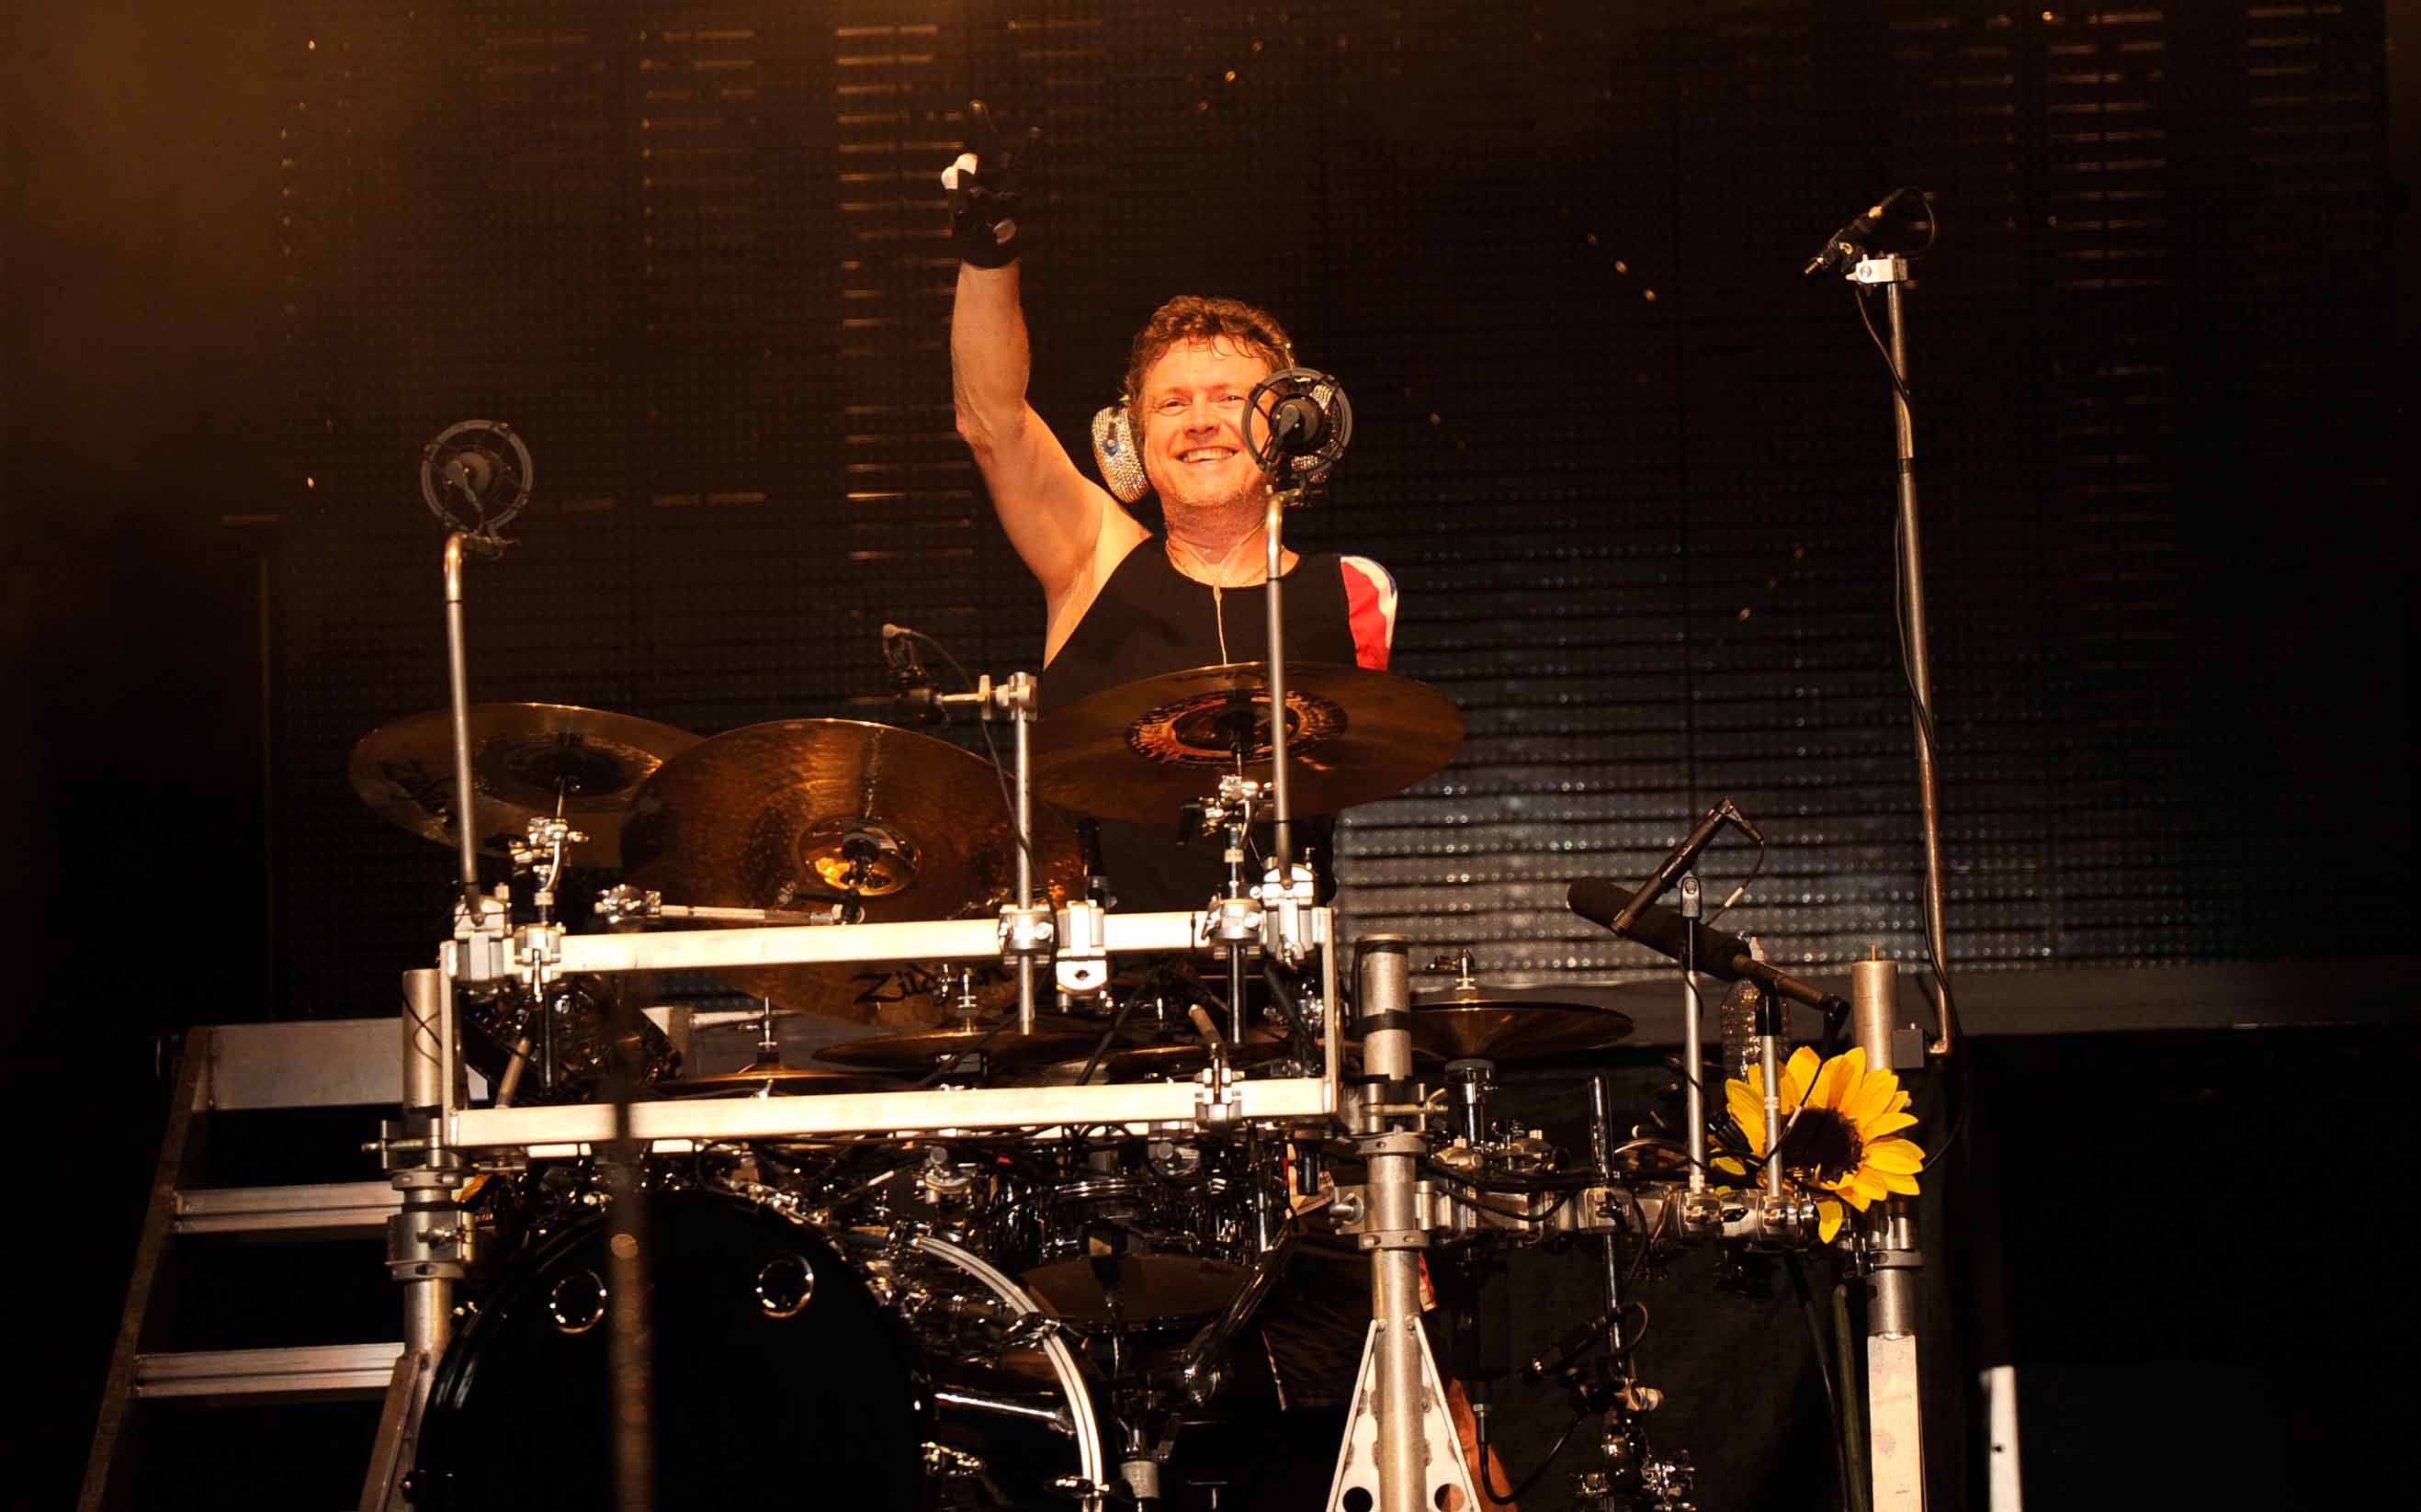 Def Leppard Auction Gives Personal Look at Rick Allen's